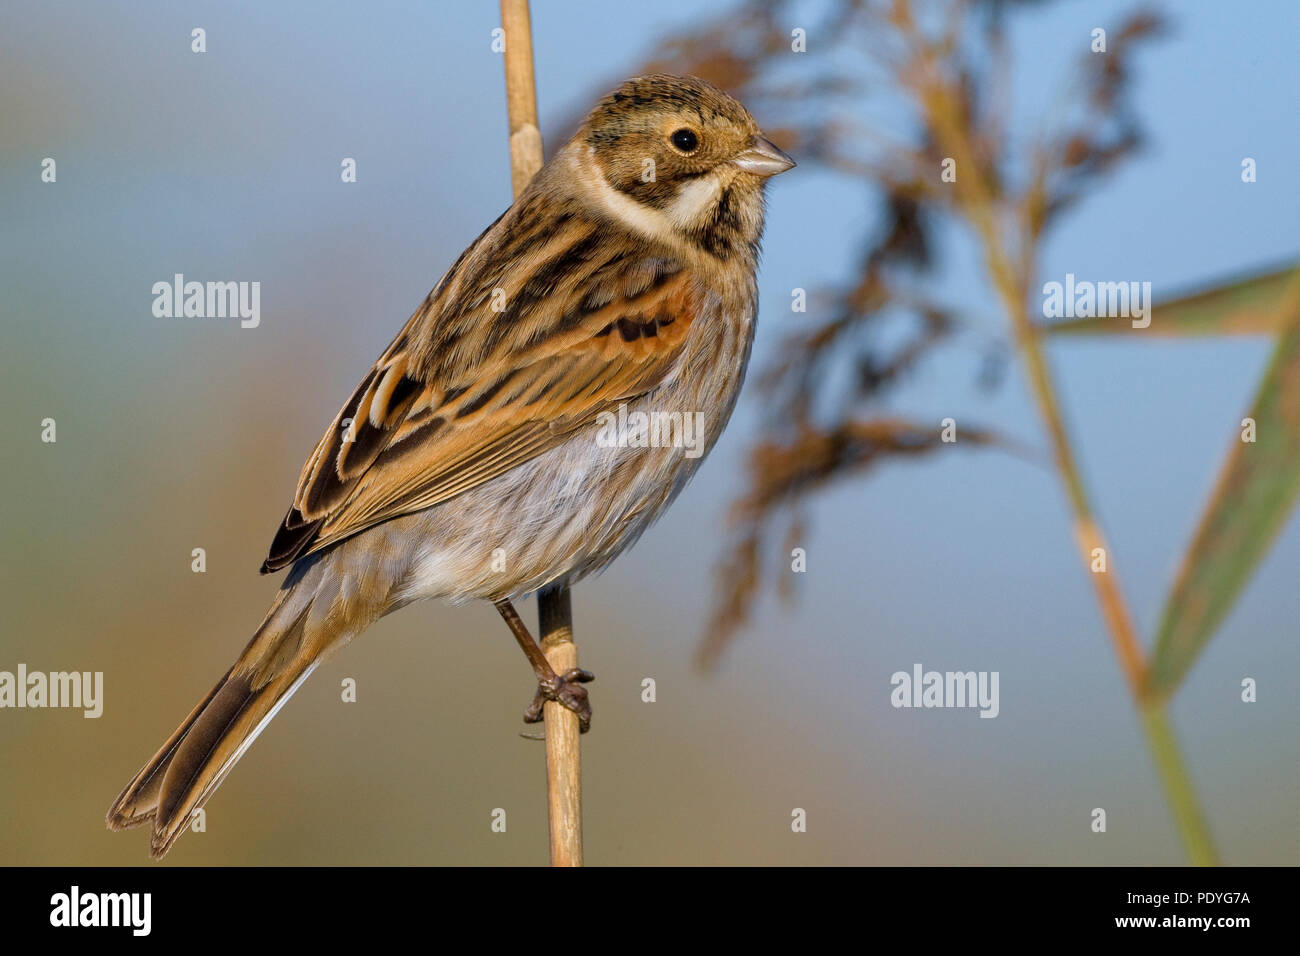 Reed Bunting in non-breeding plumage on reed stem Stock Photo